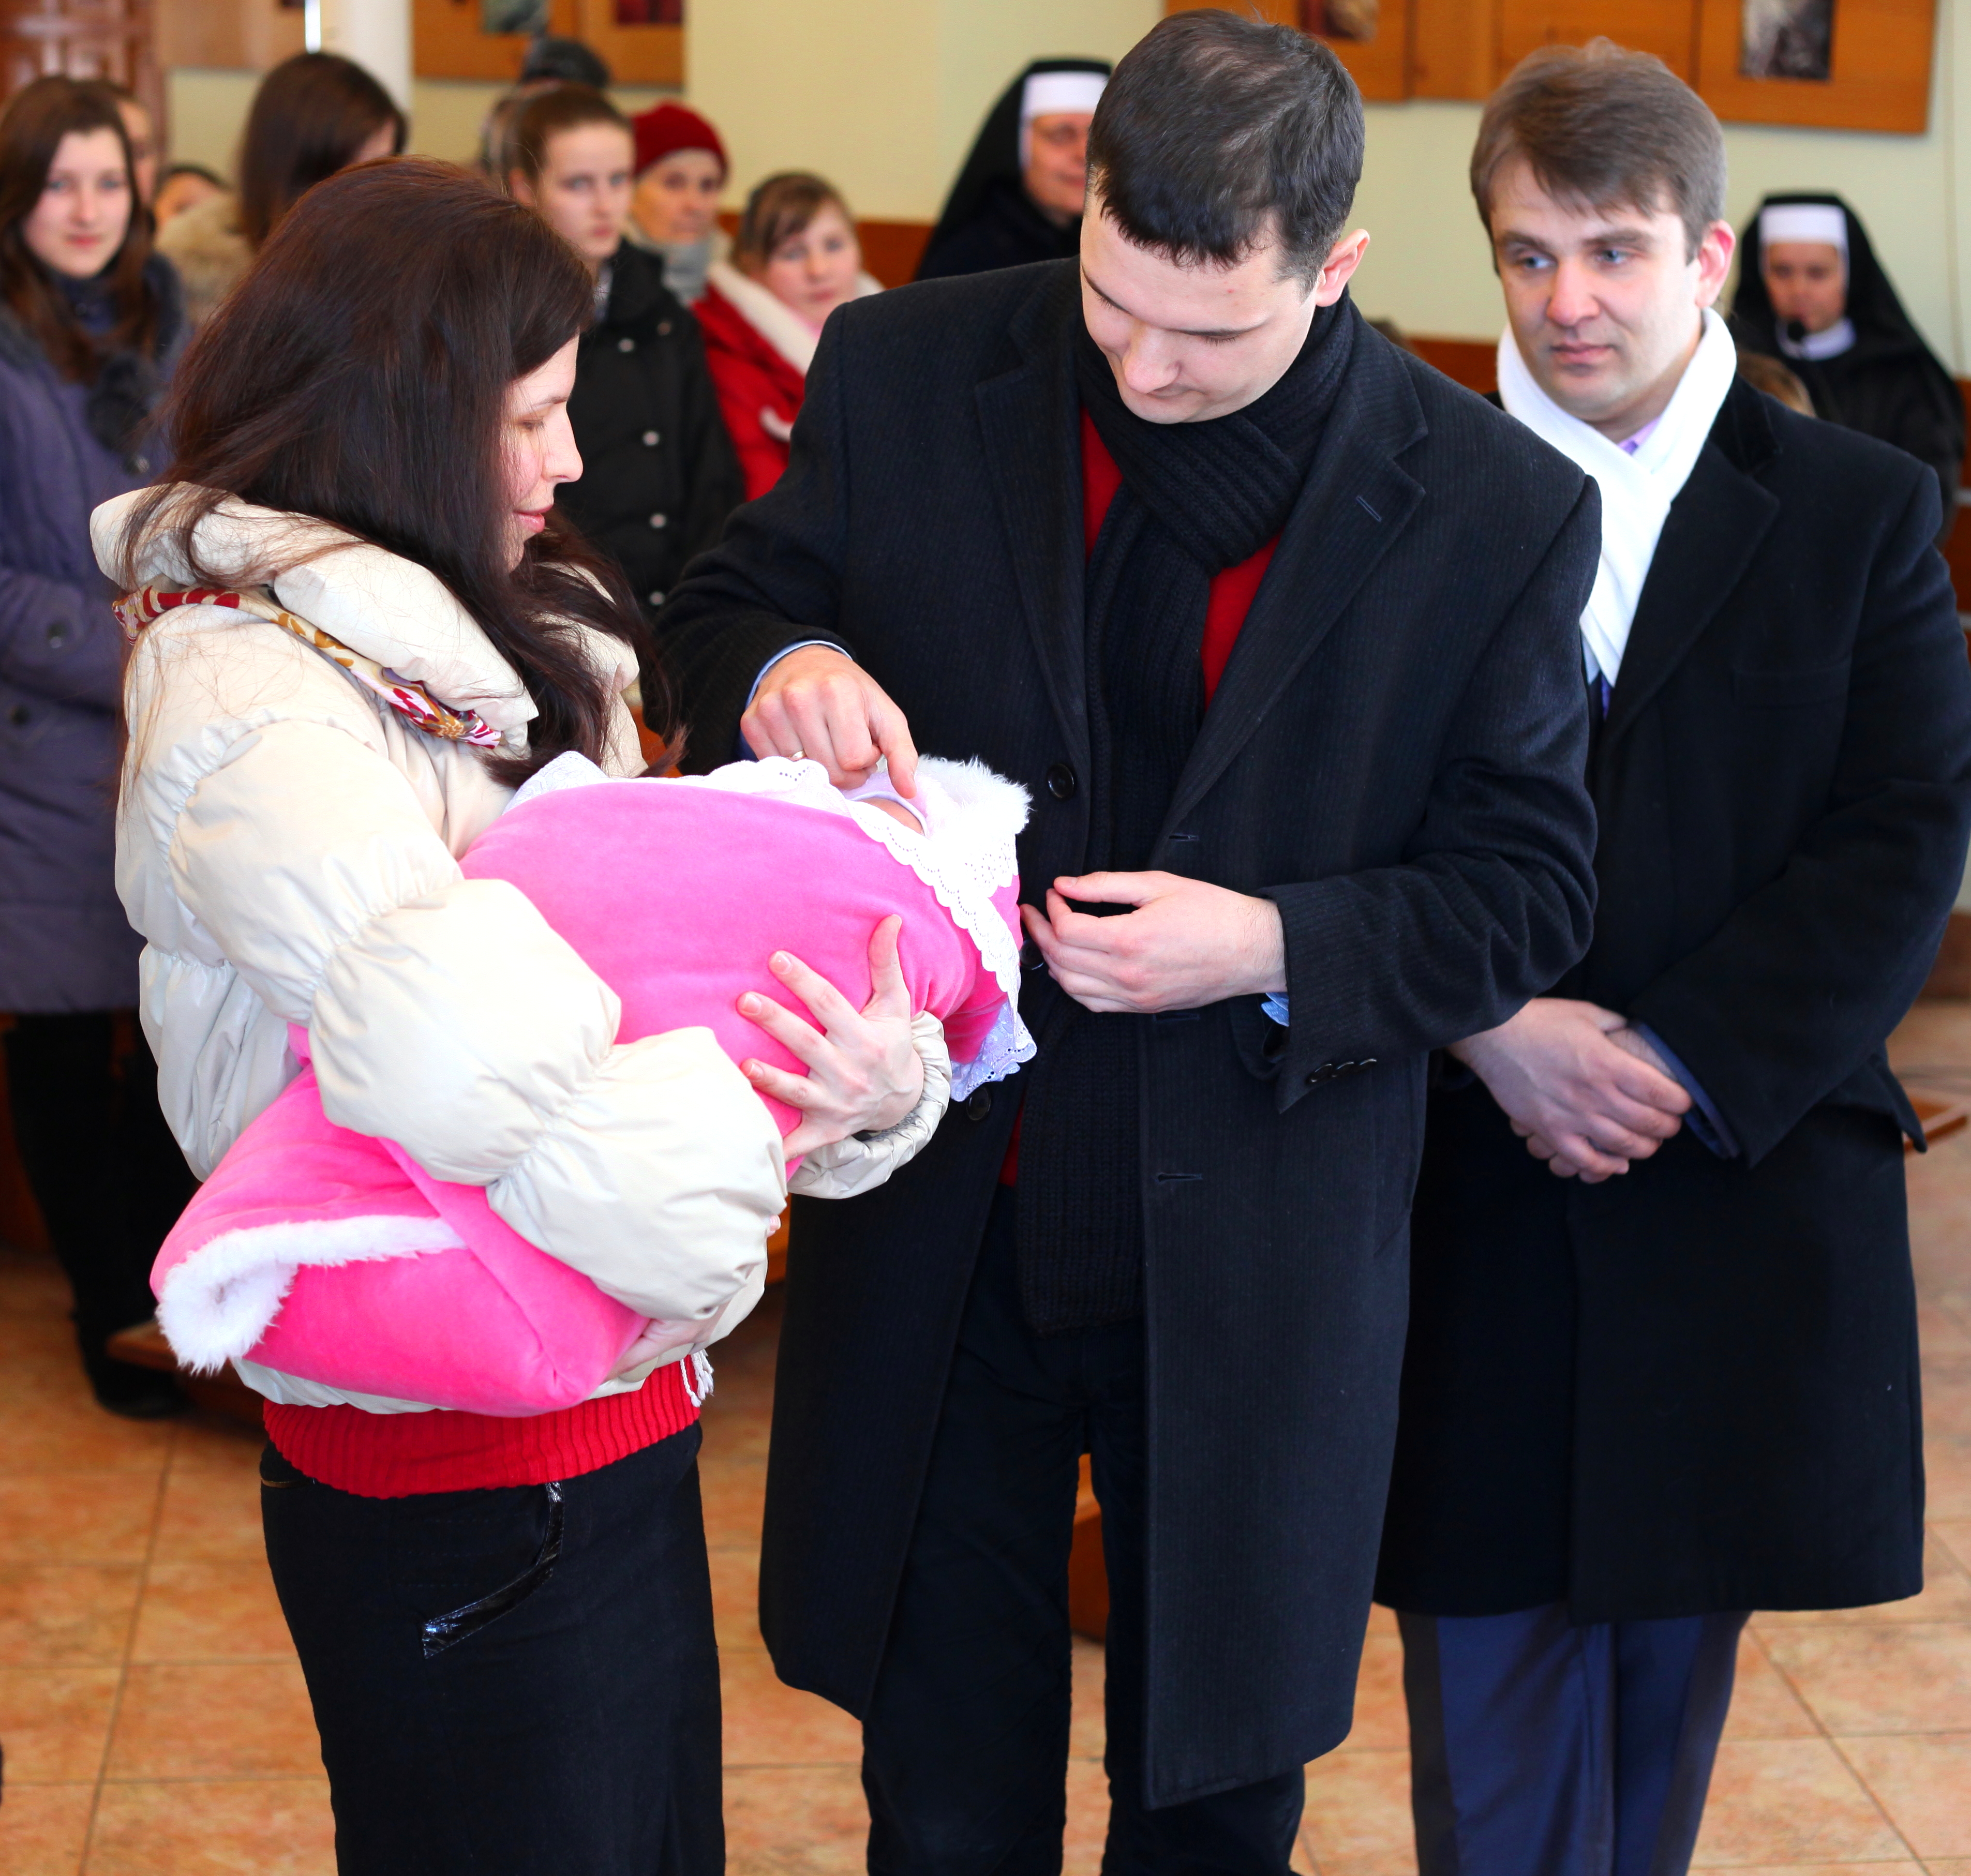 baptism of a baby girl in a Catholic church, picture 1